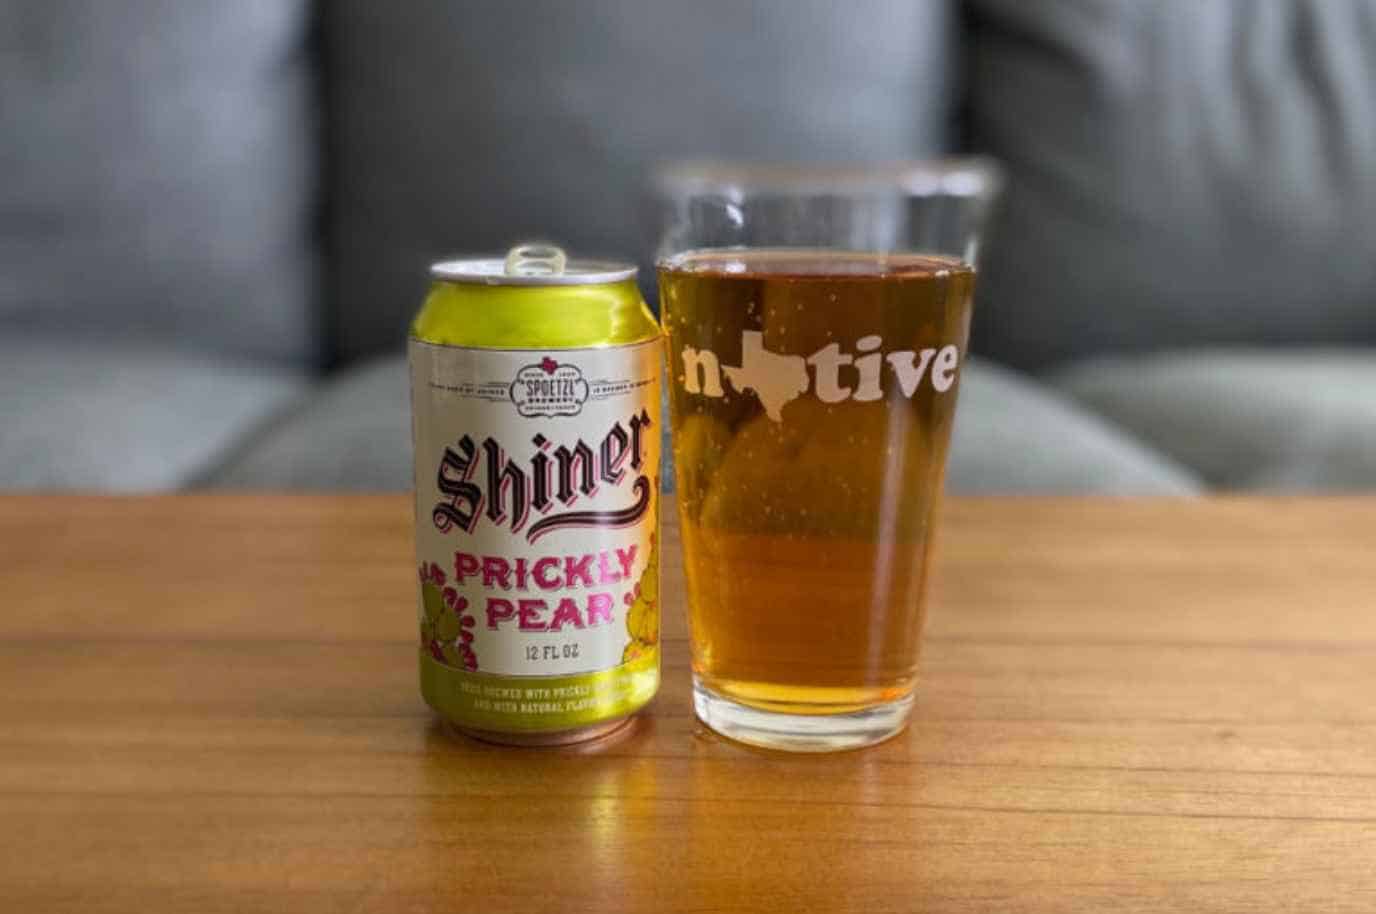 Prickly Pear by Shiner